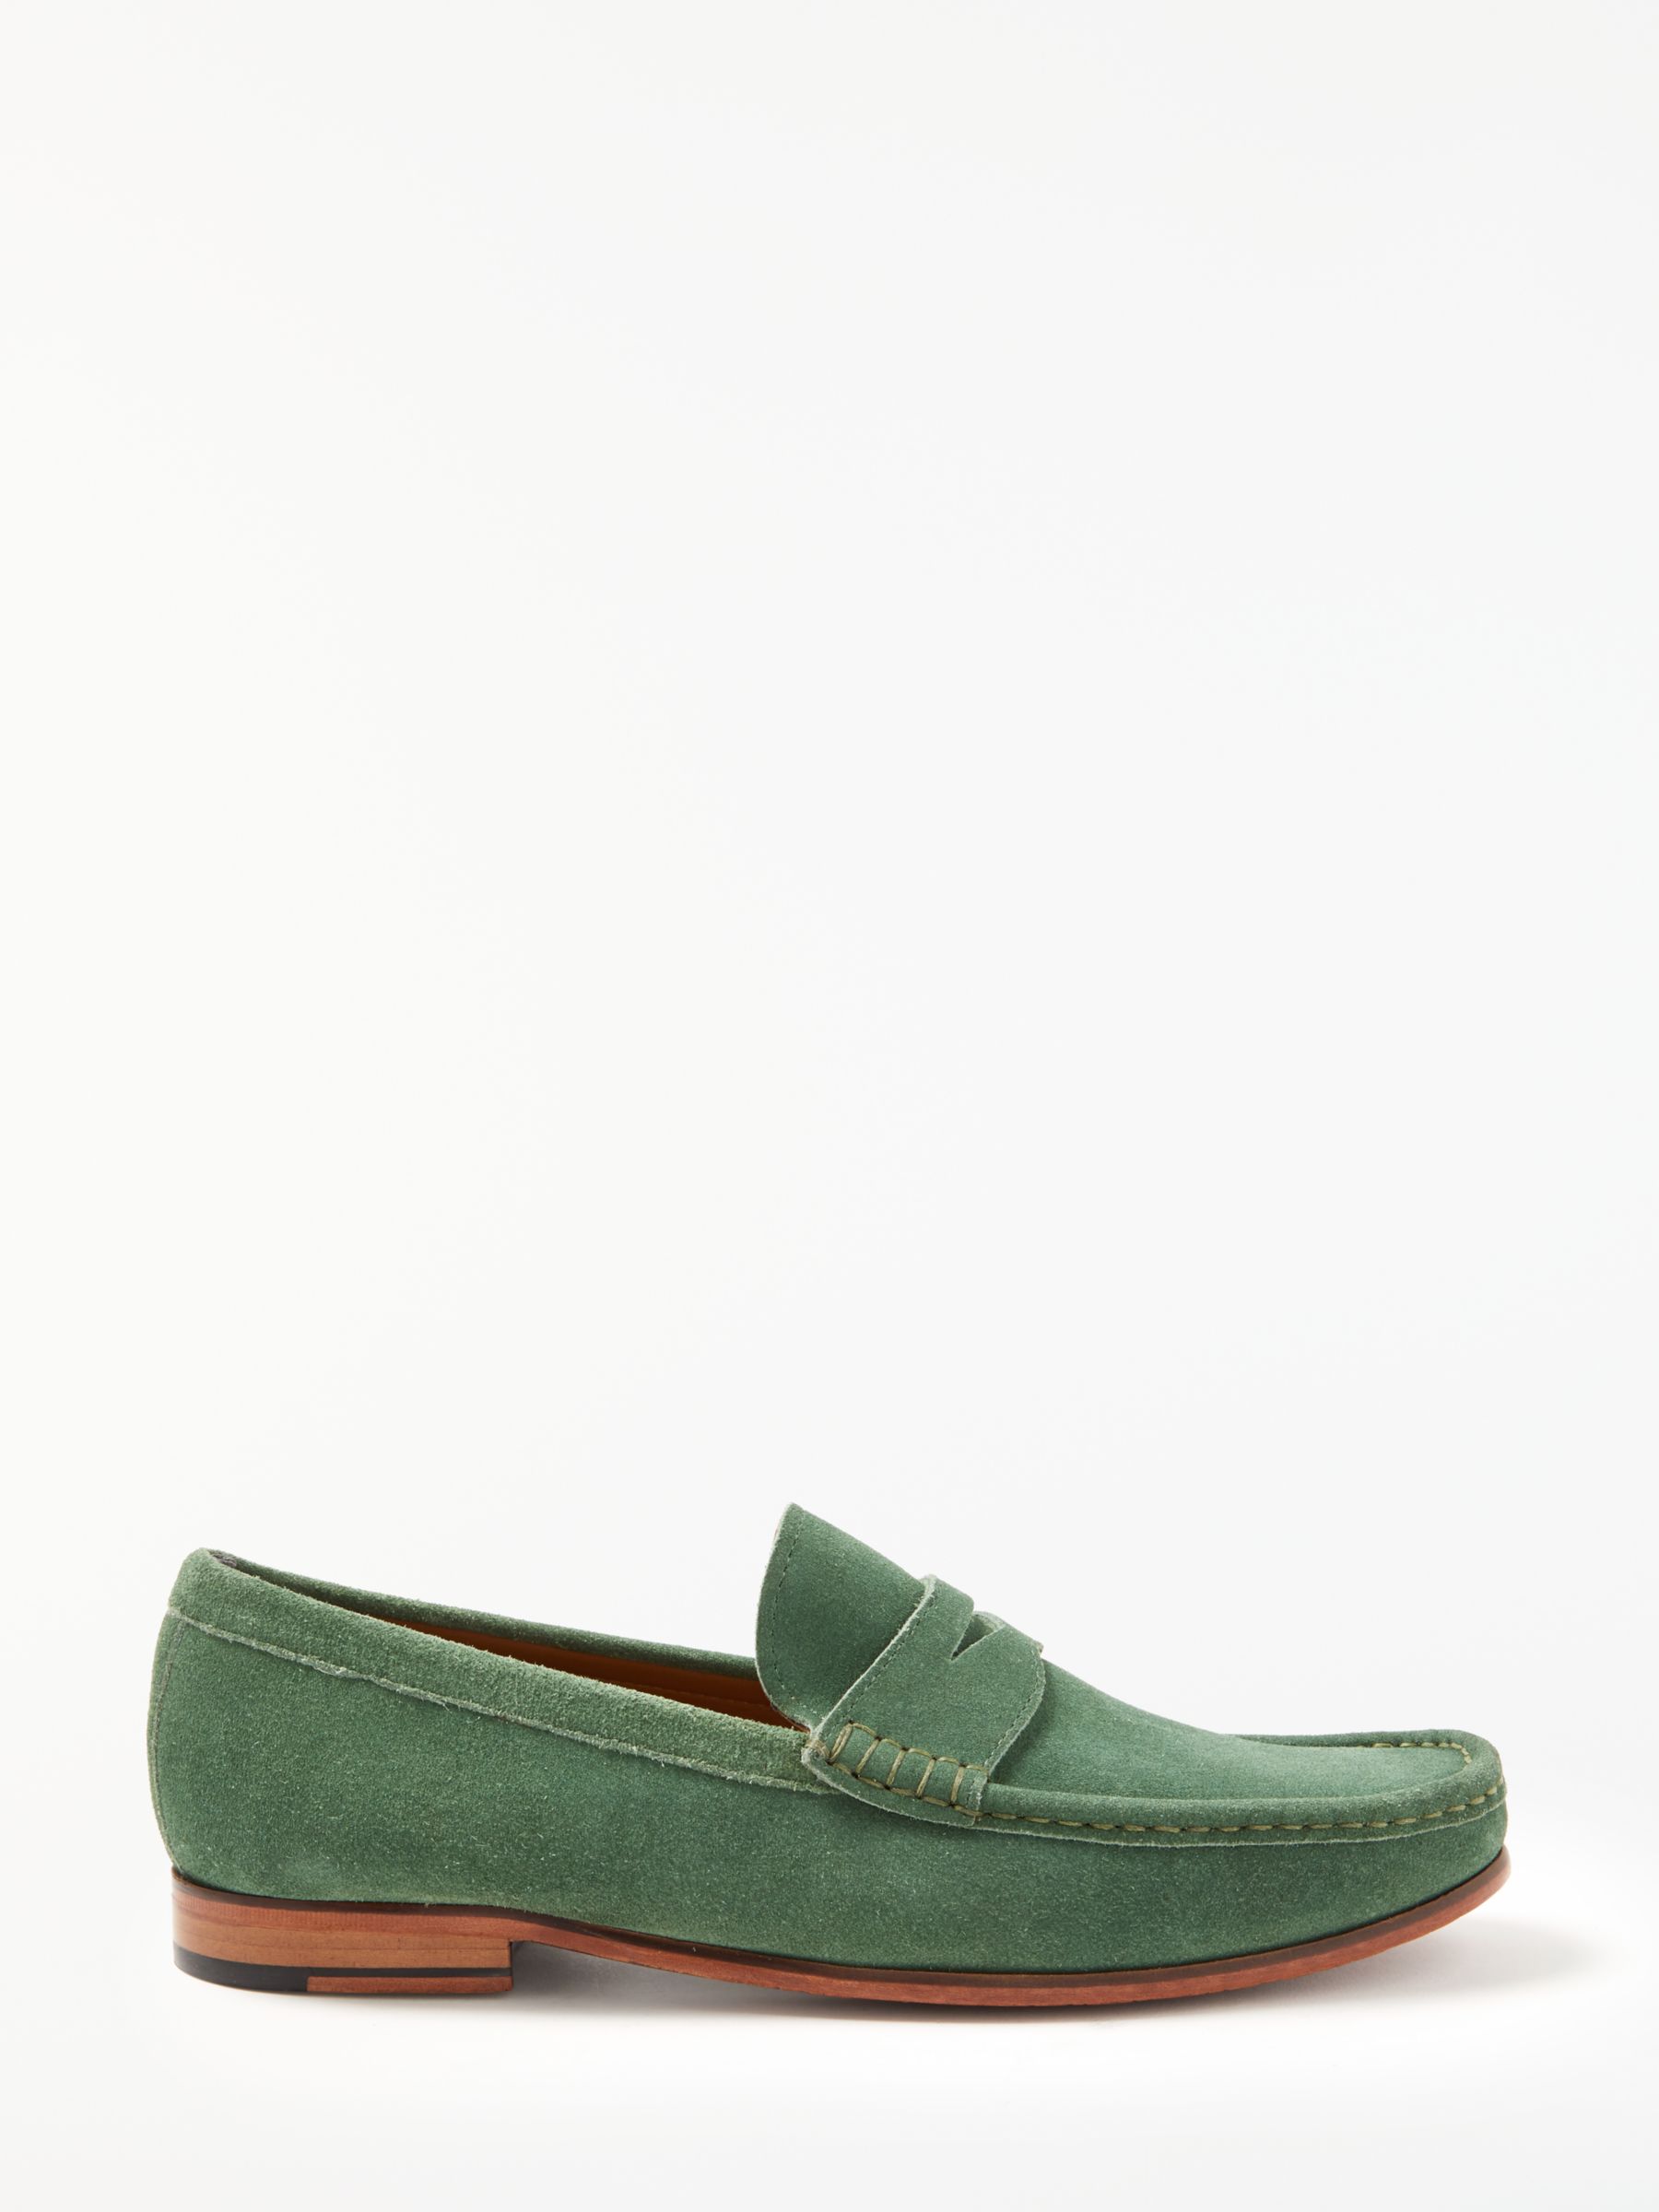 John Lewis & Partners Louis Suede Penny Loafers, Green, 10